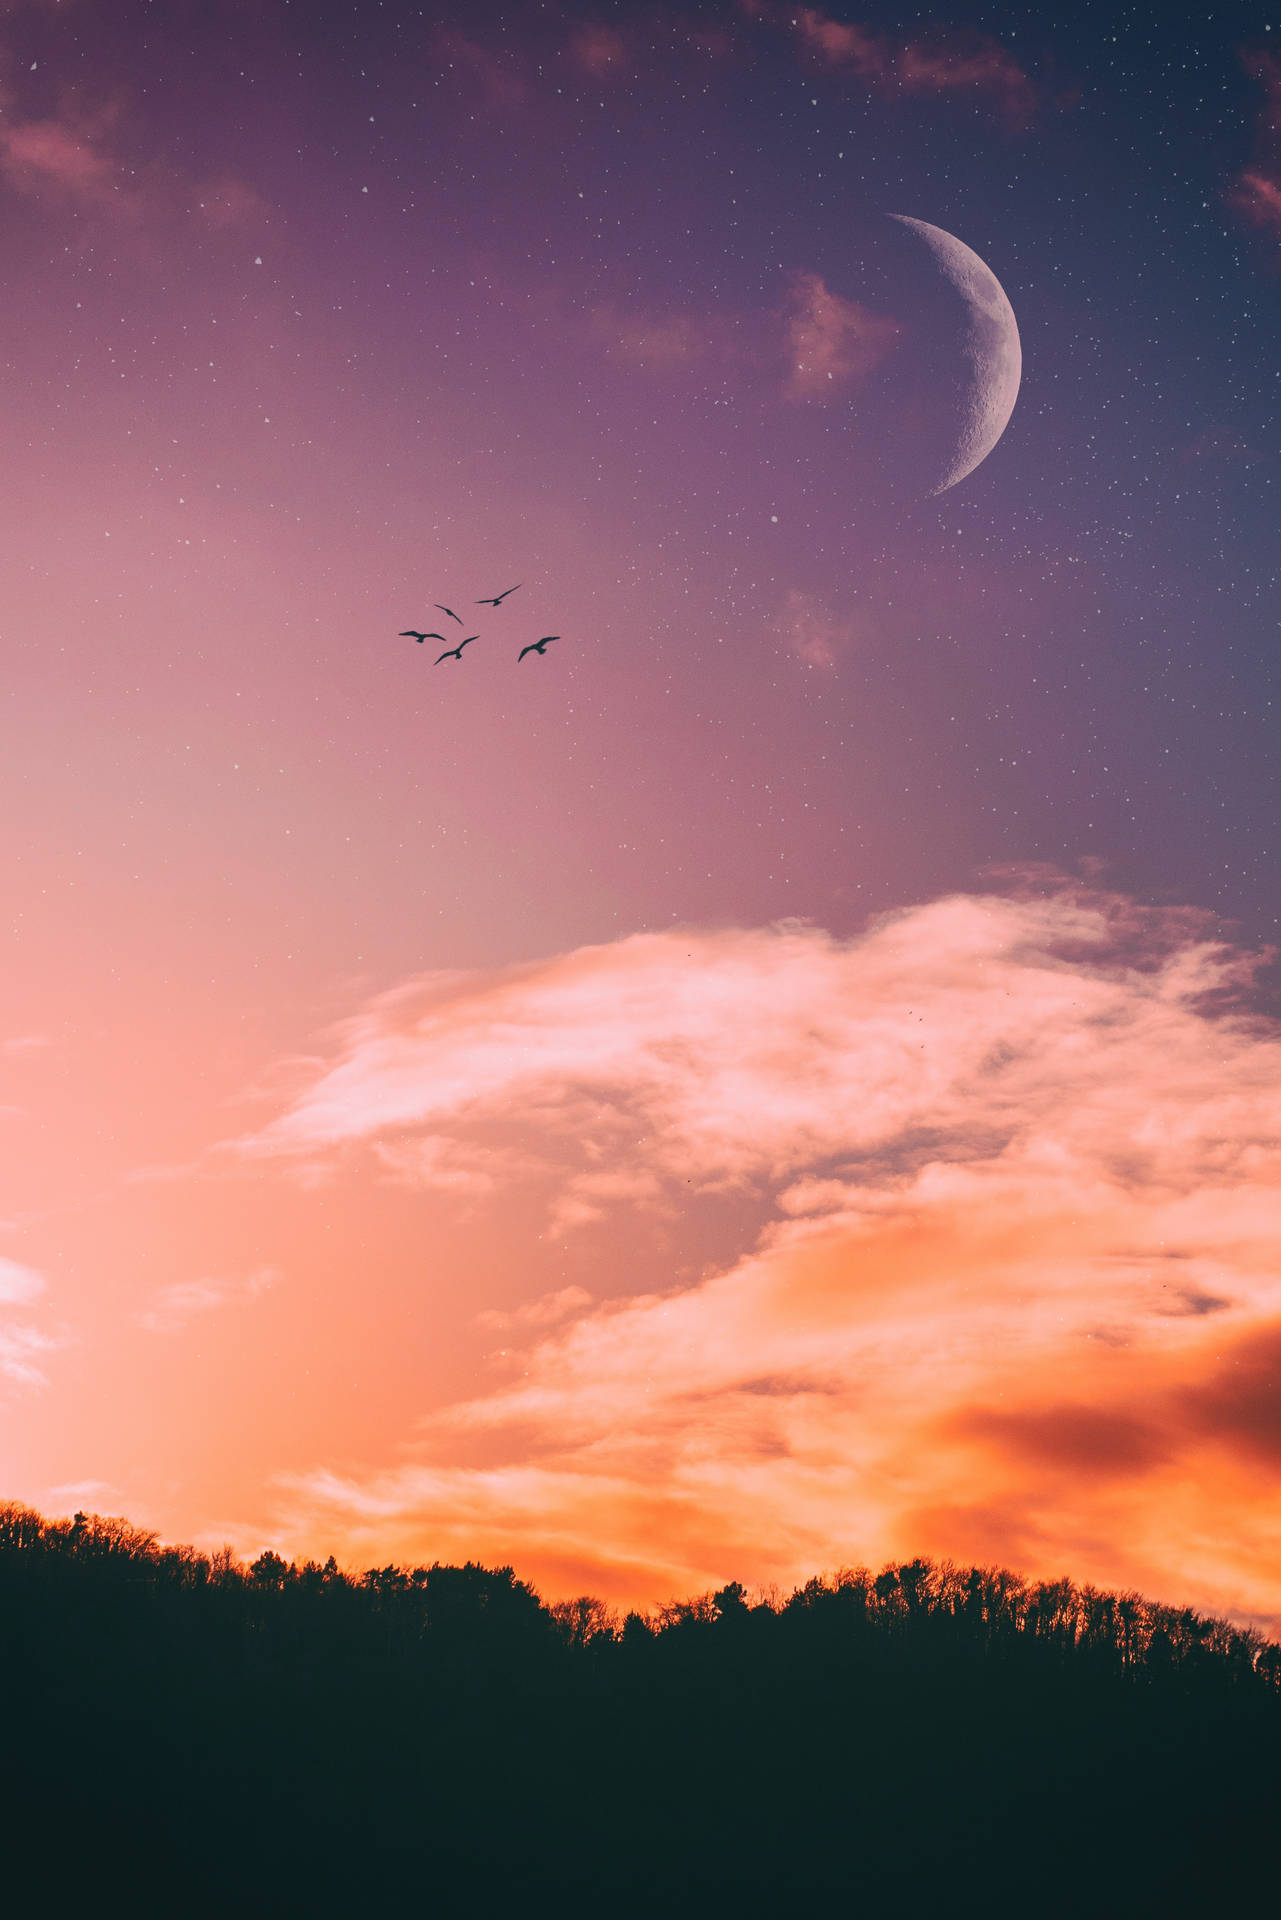 Aesthetic Sky And Crescent Moon With Birds Wallpaper